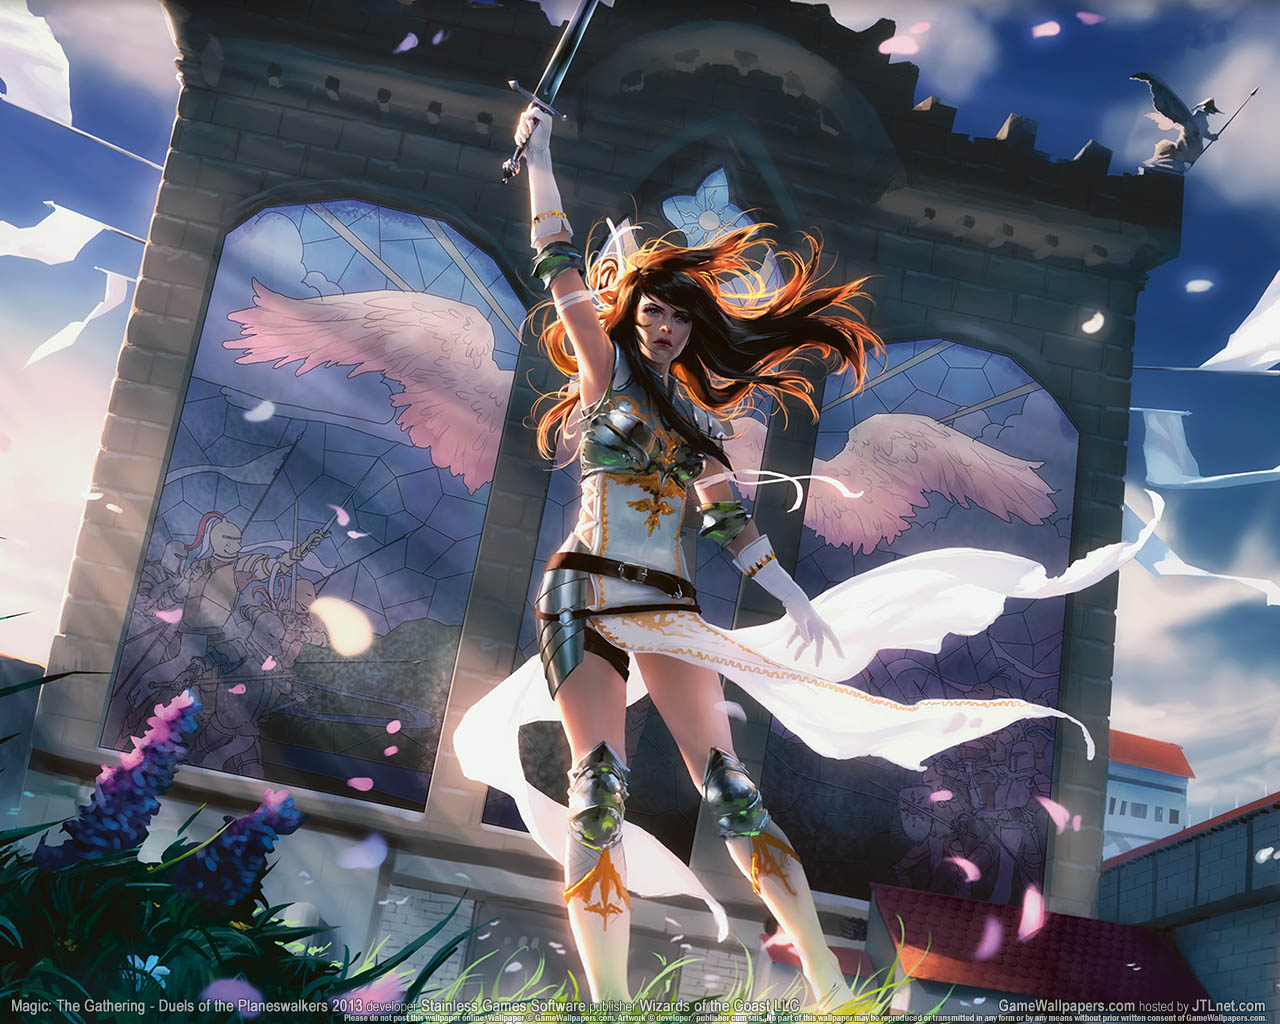 Magic%3A The Gathering - Duels of the Planeswalkers 2013 wallpaper 01 1280x1024